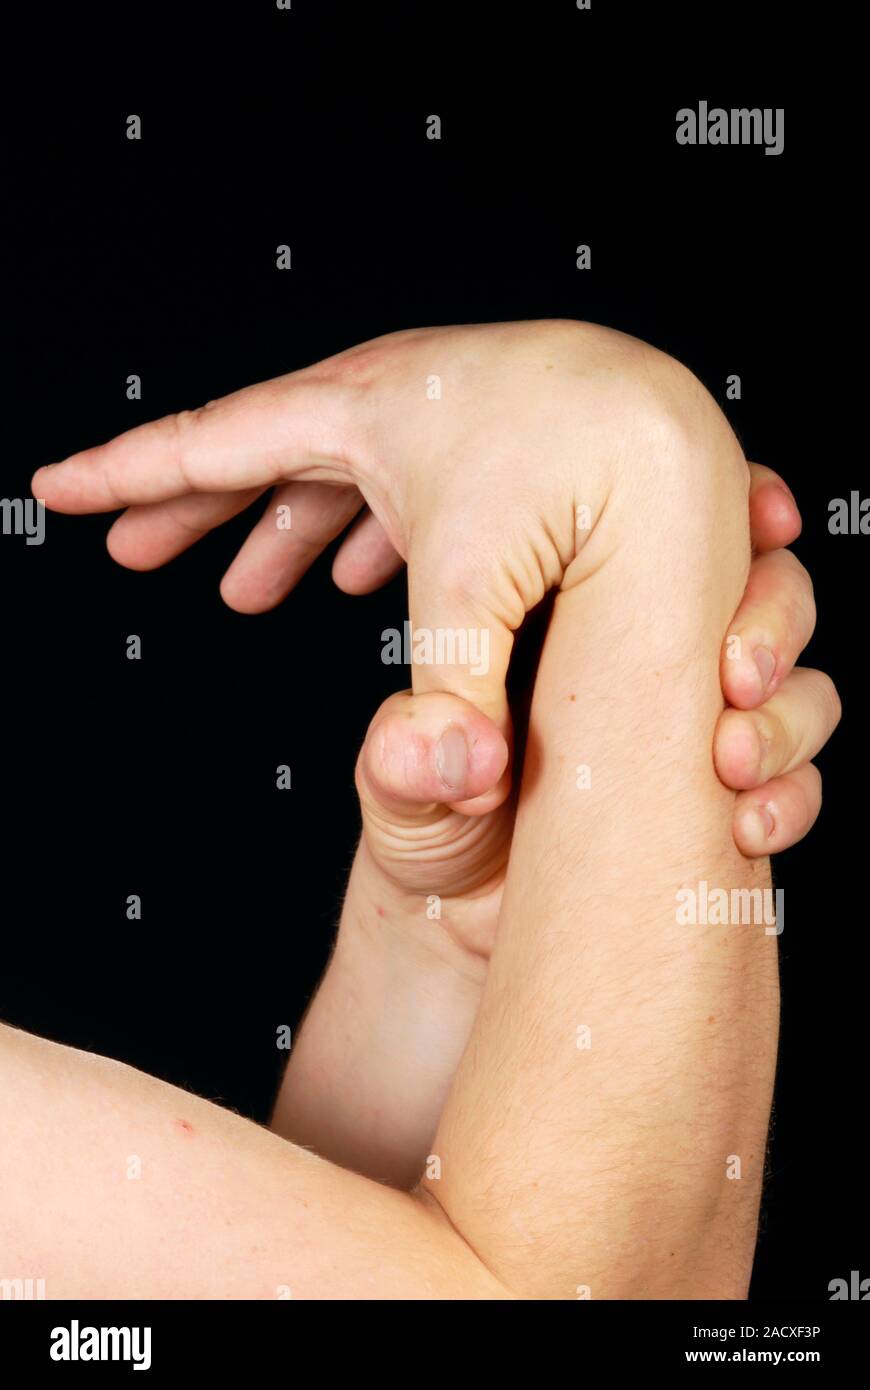 Pseudoxanthoma elasticum. Hand of a patient with pseudoxanthoma elasticum (PXE). This disease, also known as Gronblad-Strandberg Syndrome, is an autos Stock Photo